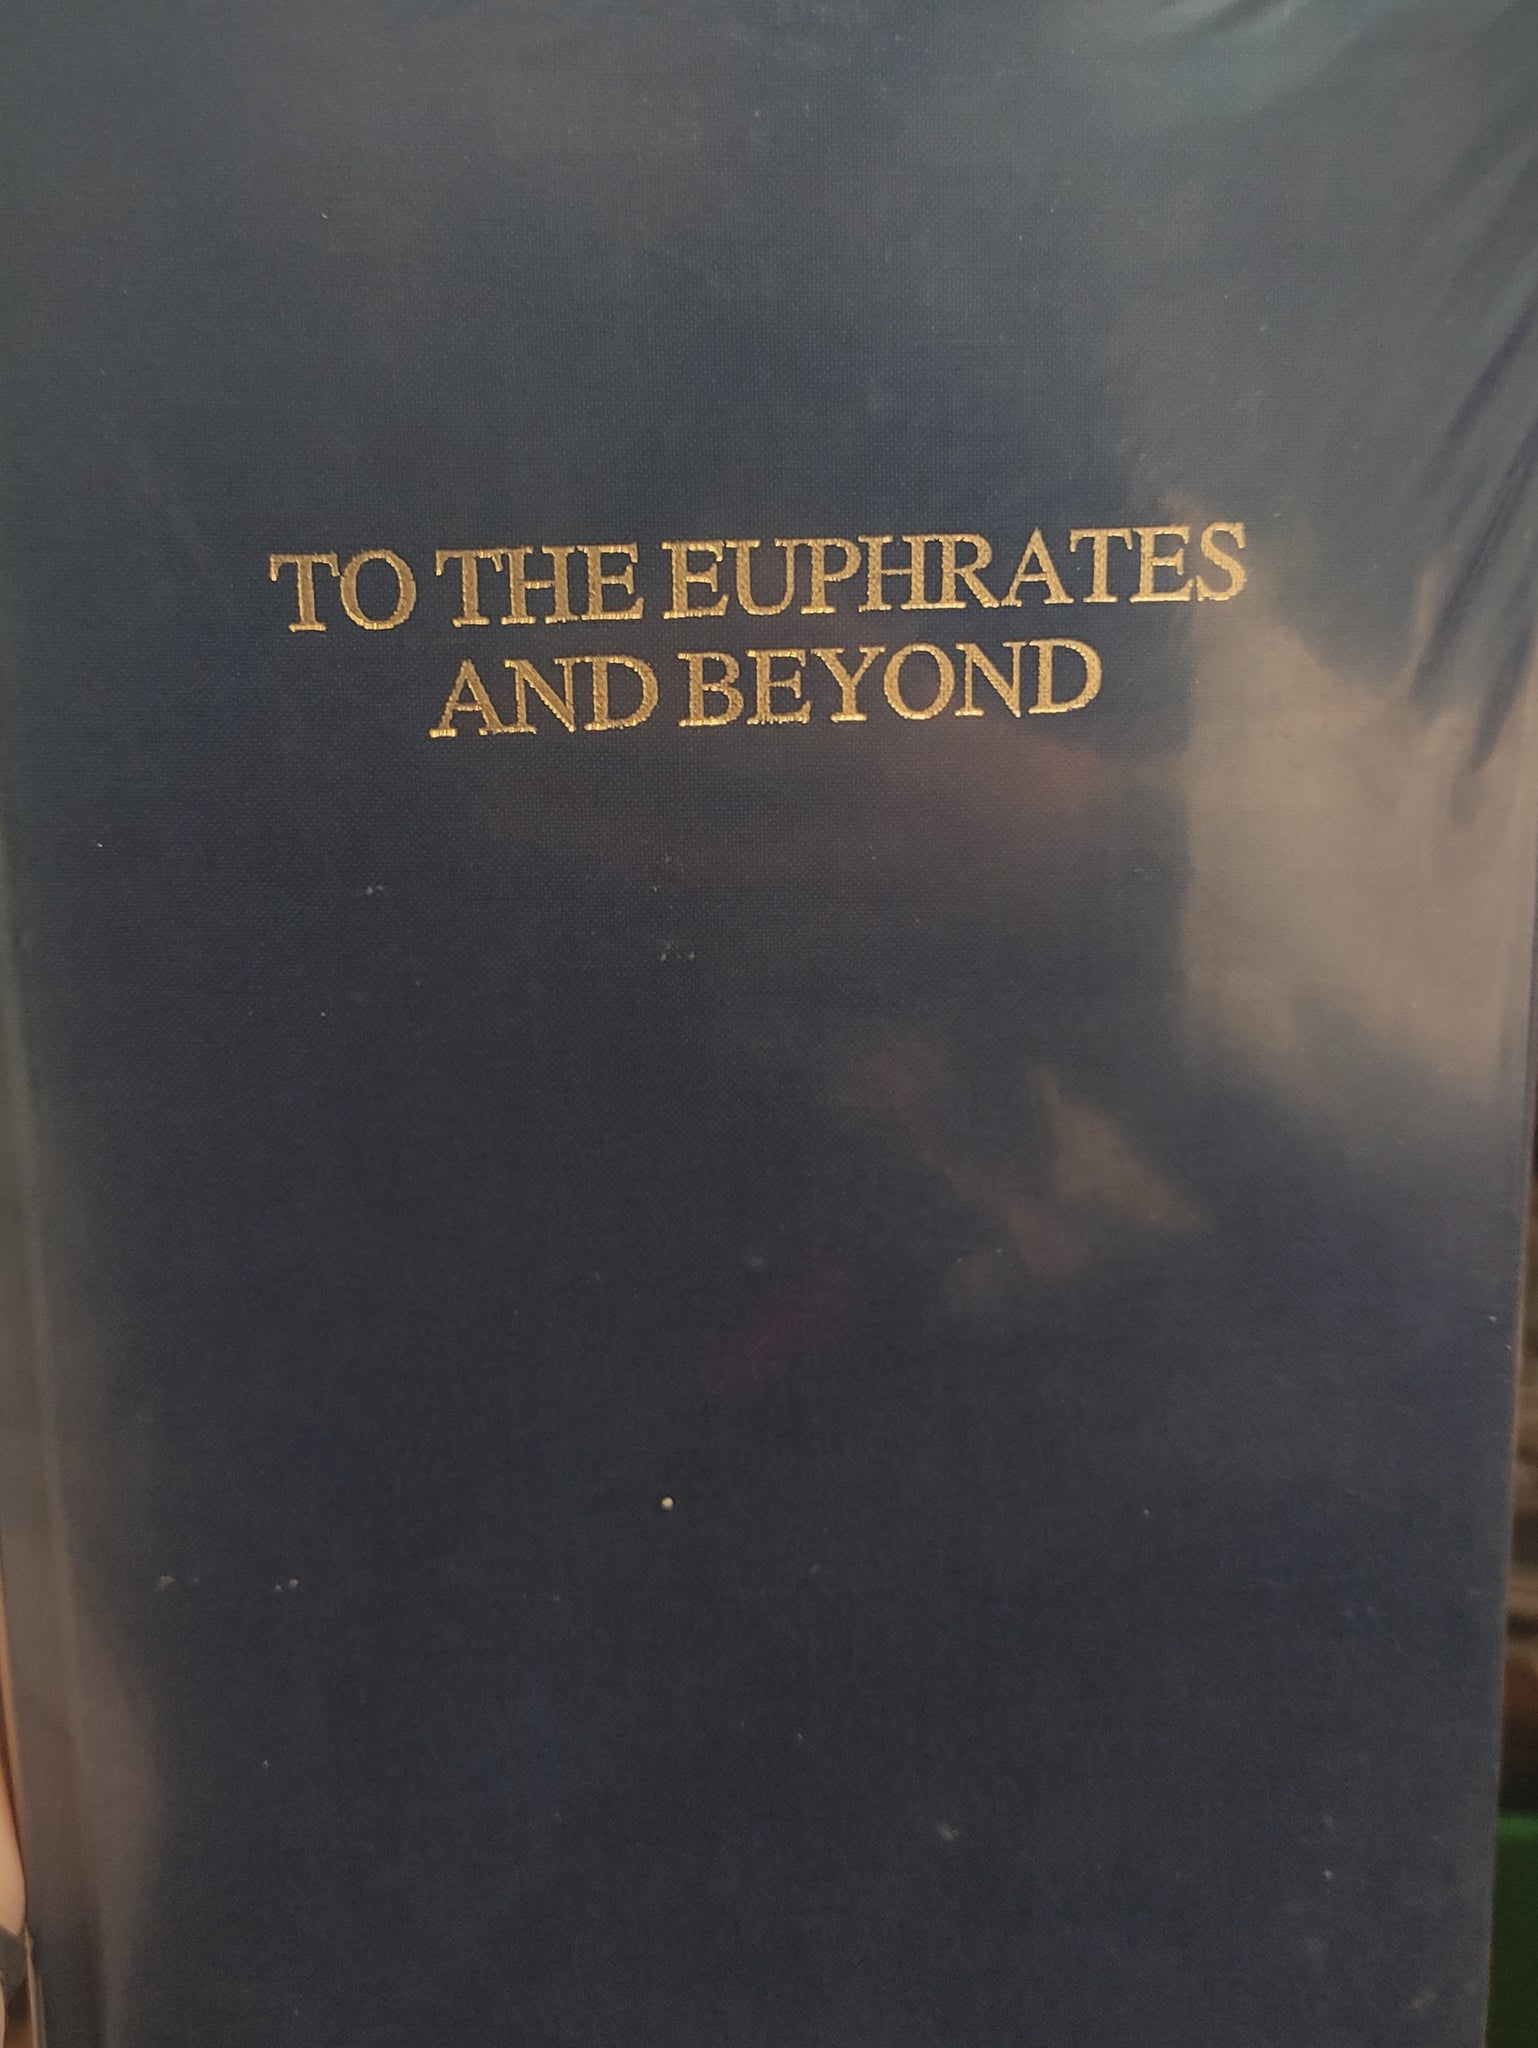 To the Euphrates and beyond.